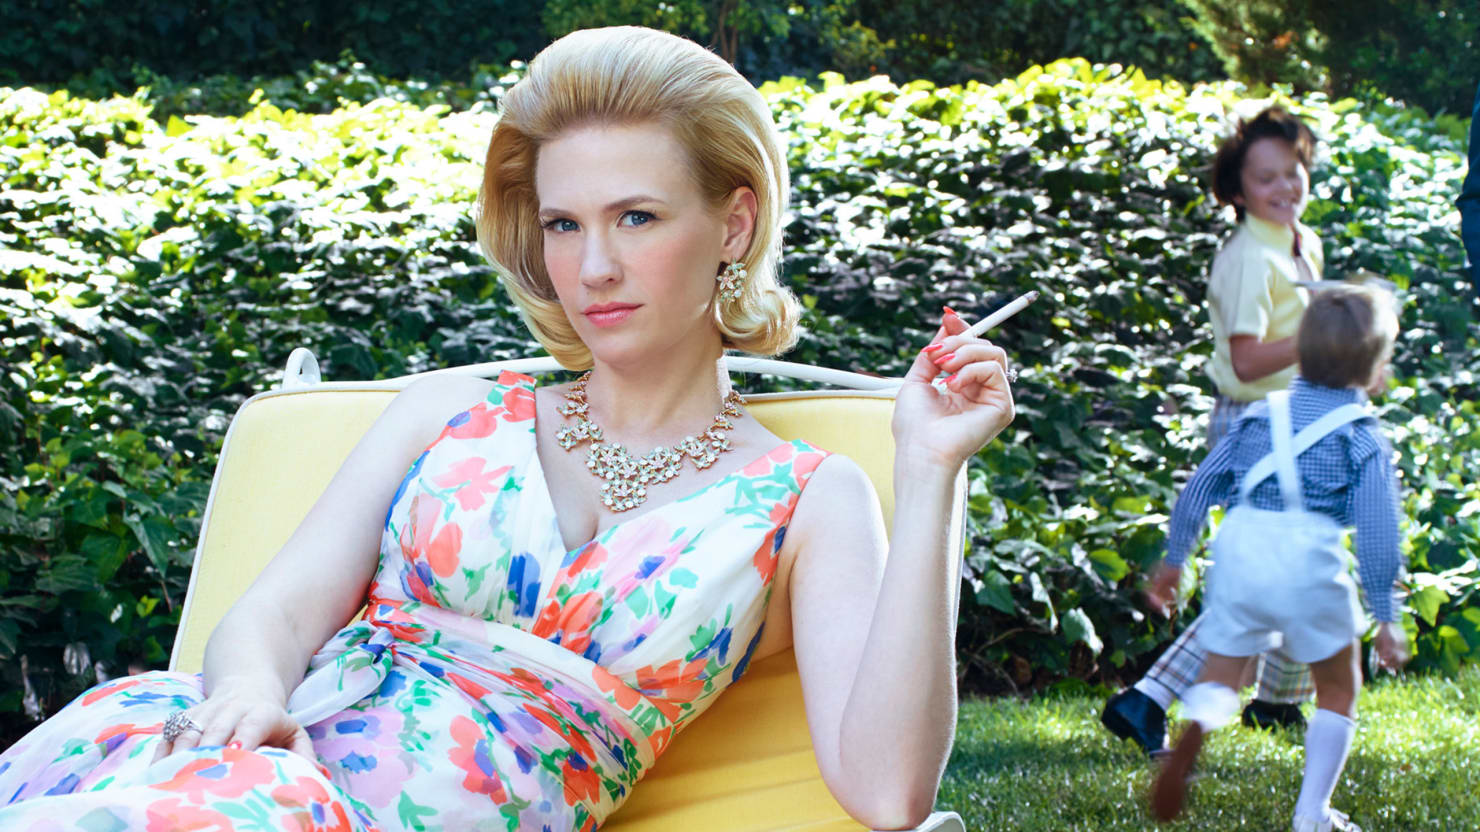 How ‘mad Men’ Made Smoking Glamorous—then Deadly